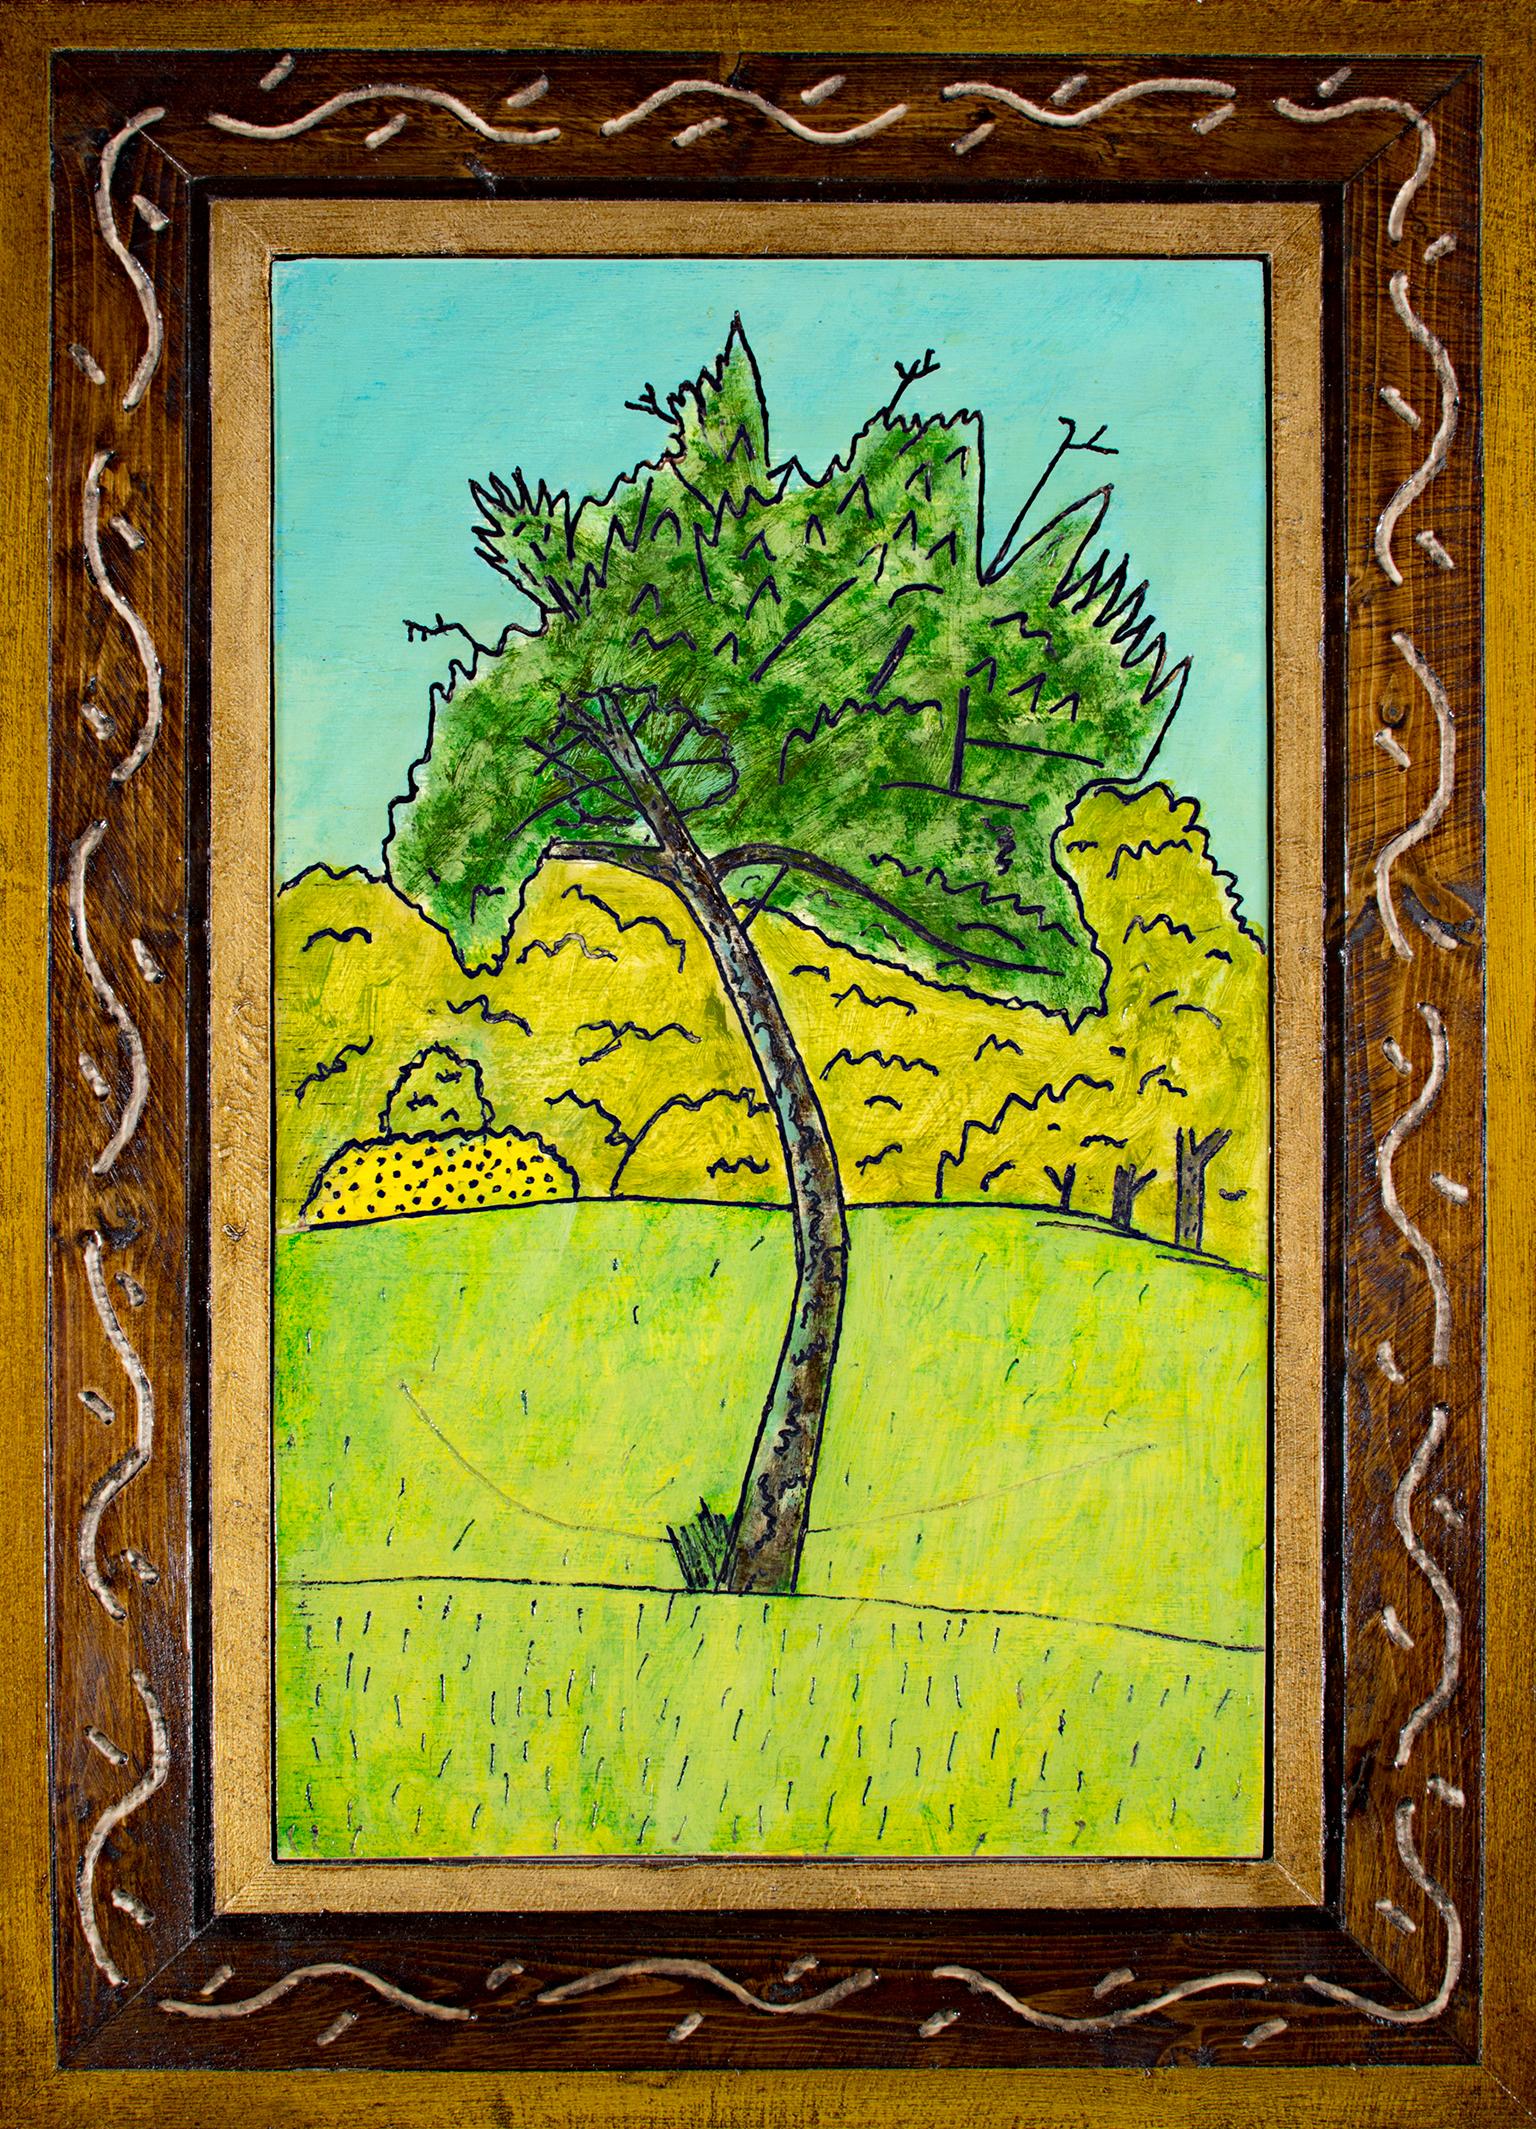 "Yellow Trees" is an original oil painting on wood by Wisconsin artist Robert Richter, signed on the verso. The frame was created and hand-carved by the artist, making it an integral piece of the work of art. The trees of the title rest in the